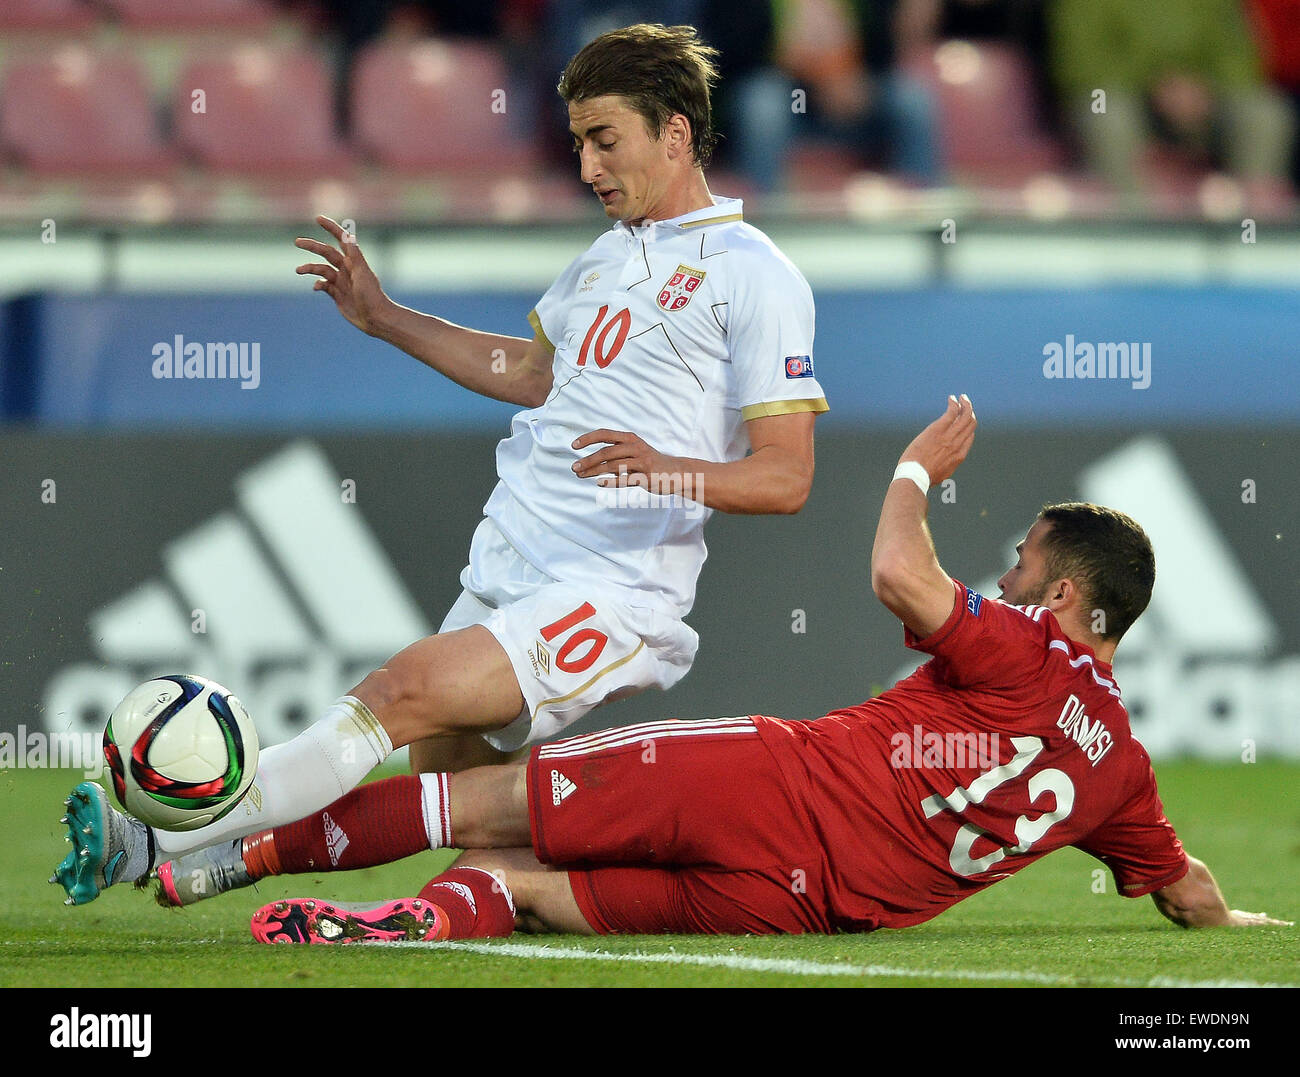 Prague, Czech Republic. 23rd June, 2015. Riza Durmisi of Denmark, right, and Filip Djuricic of Serbia fight for a ball during the Euro U21 soccer championship group A match Denmark vs Serbia in Prague, Czech Republic, on Tuesday, June 23, 2015. © Katerina Sulova/CTK Photo/Alamy Live News Stock Photo